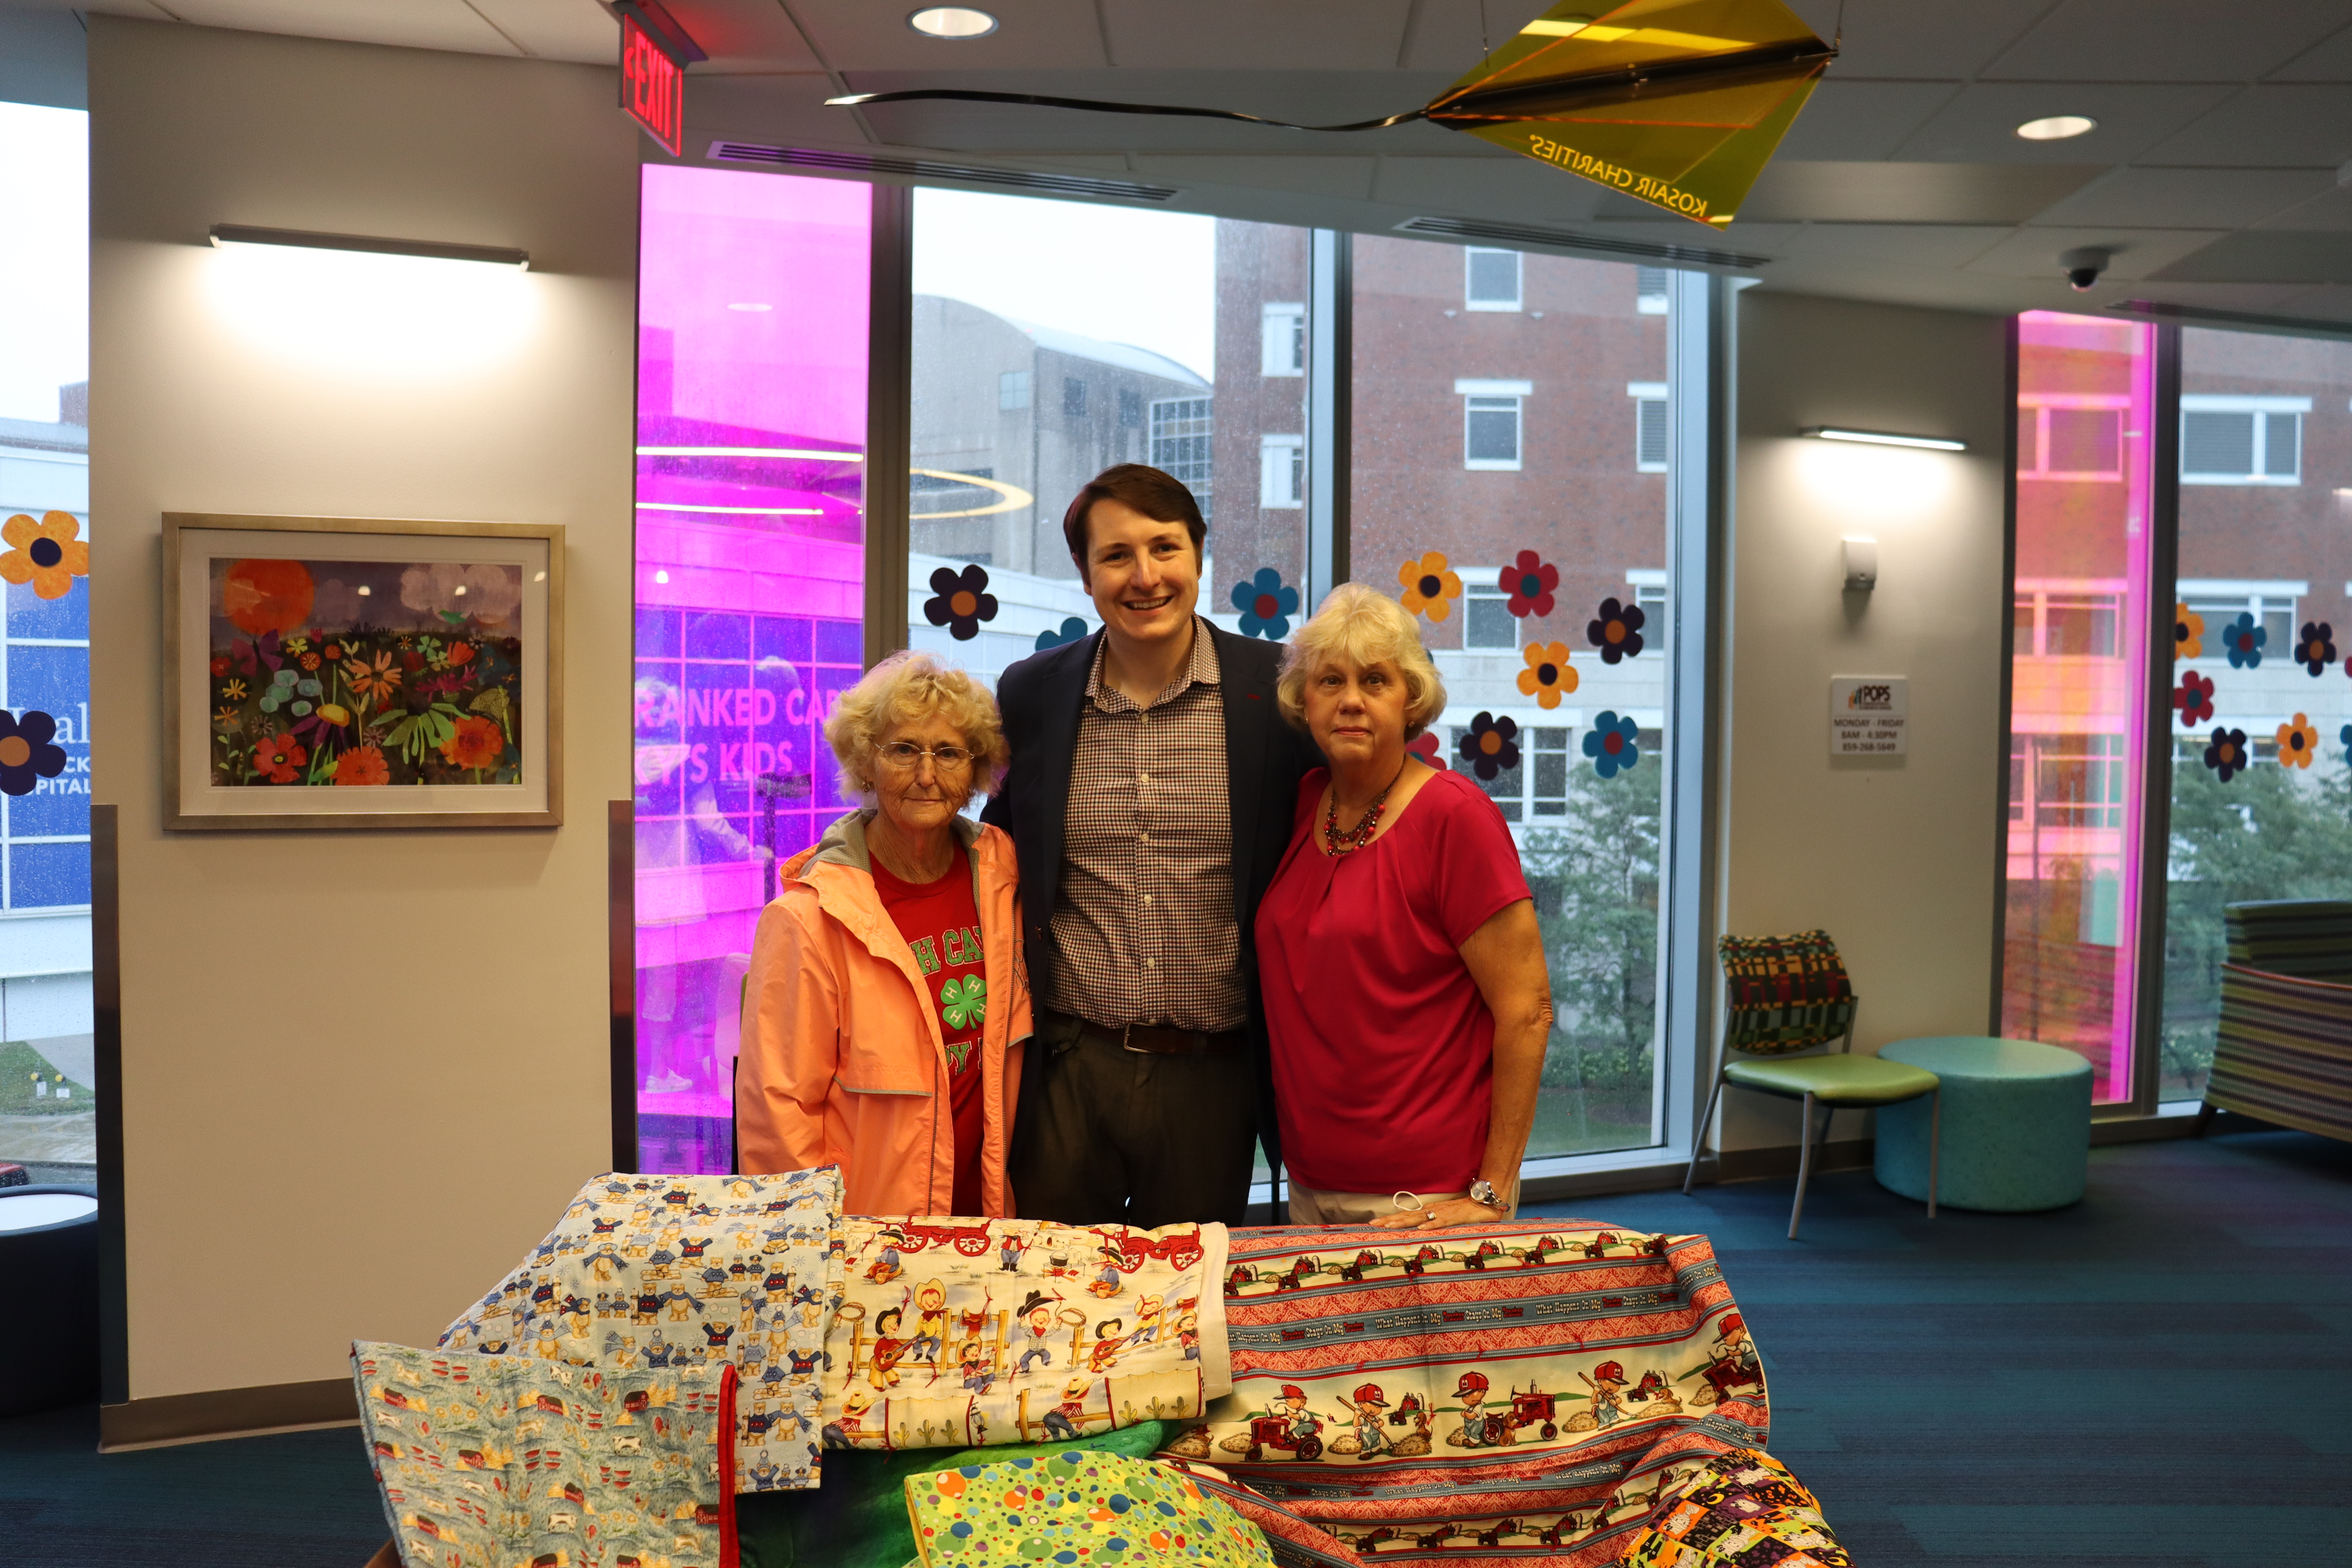 Baby Quilts donated to Shriners - July 26th 2022